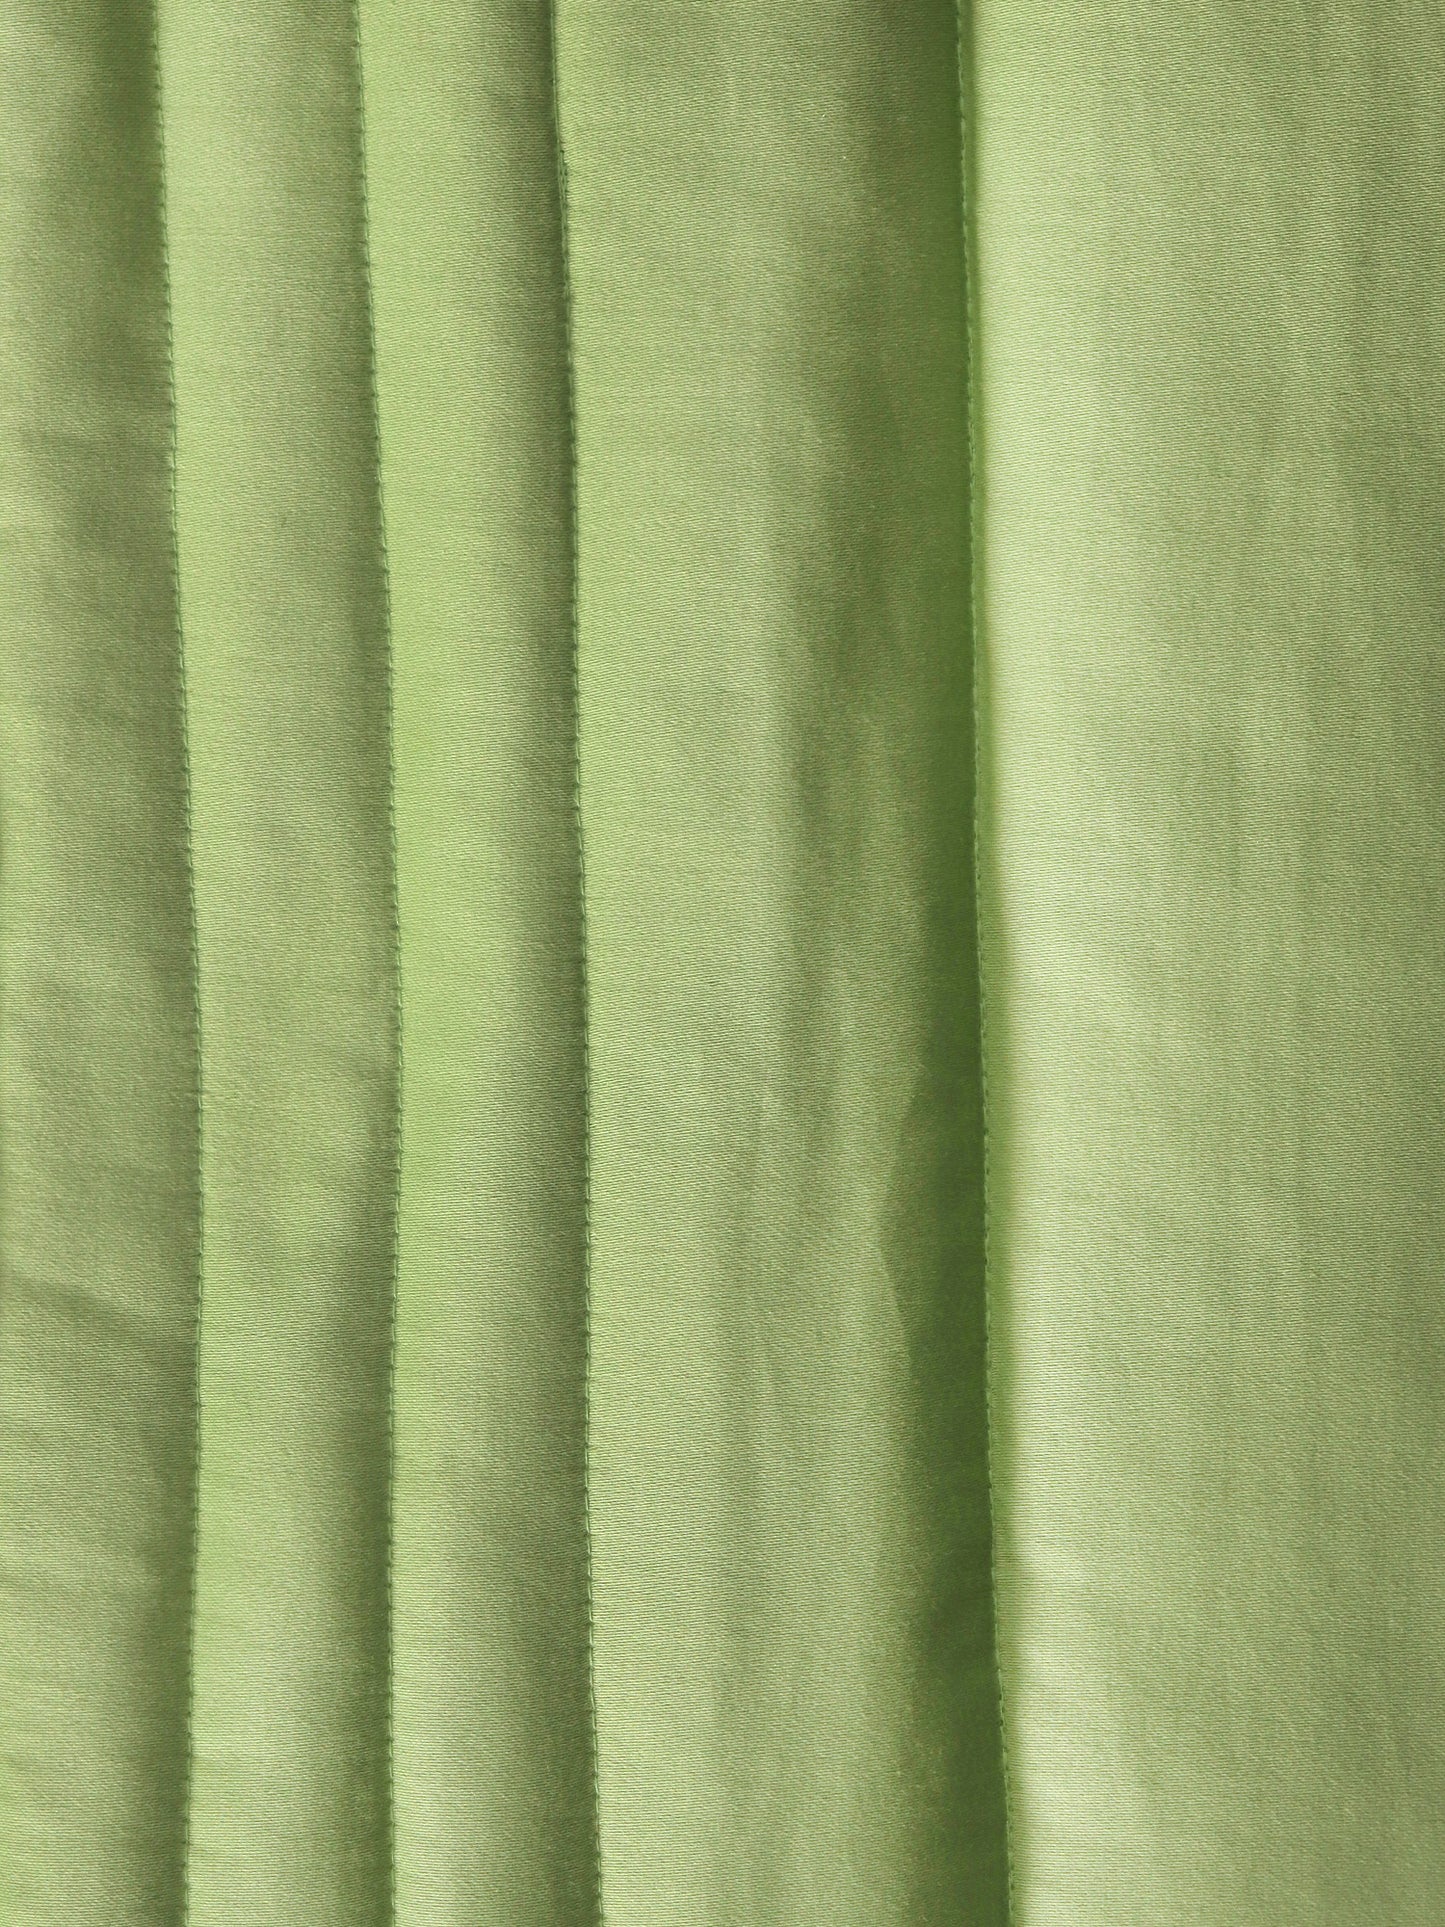 Reversible Qulit with Lines Cotton 300TC Green - 90" X 108", 17" X 27"